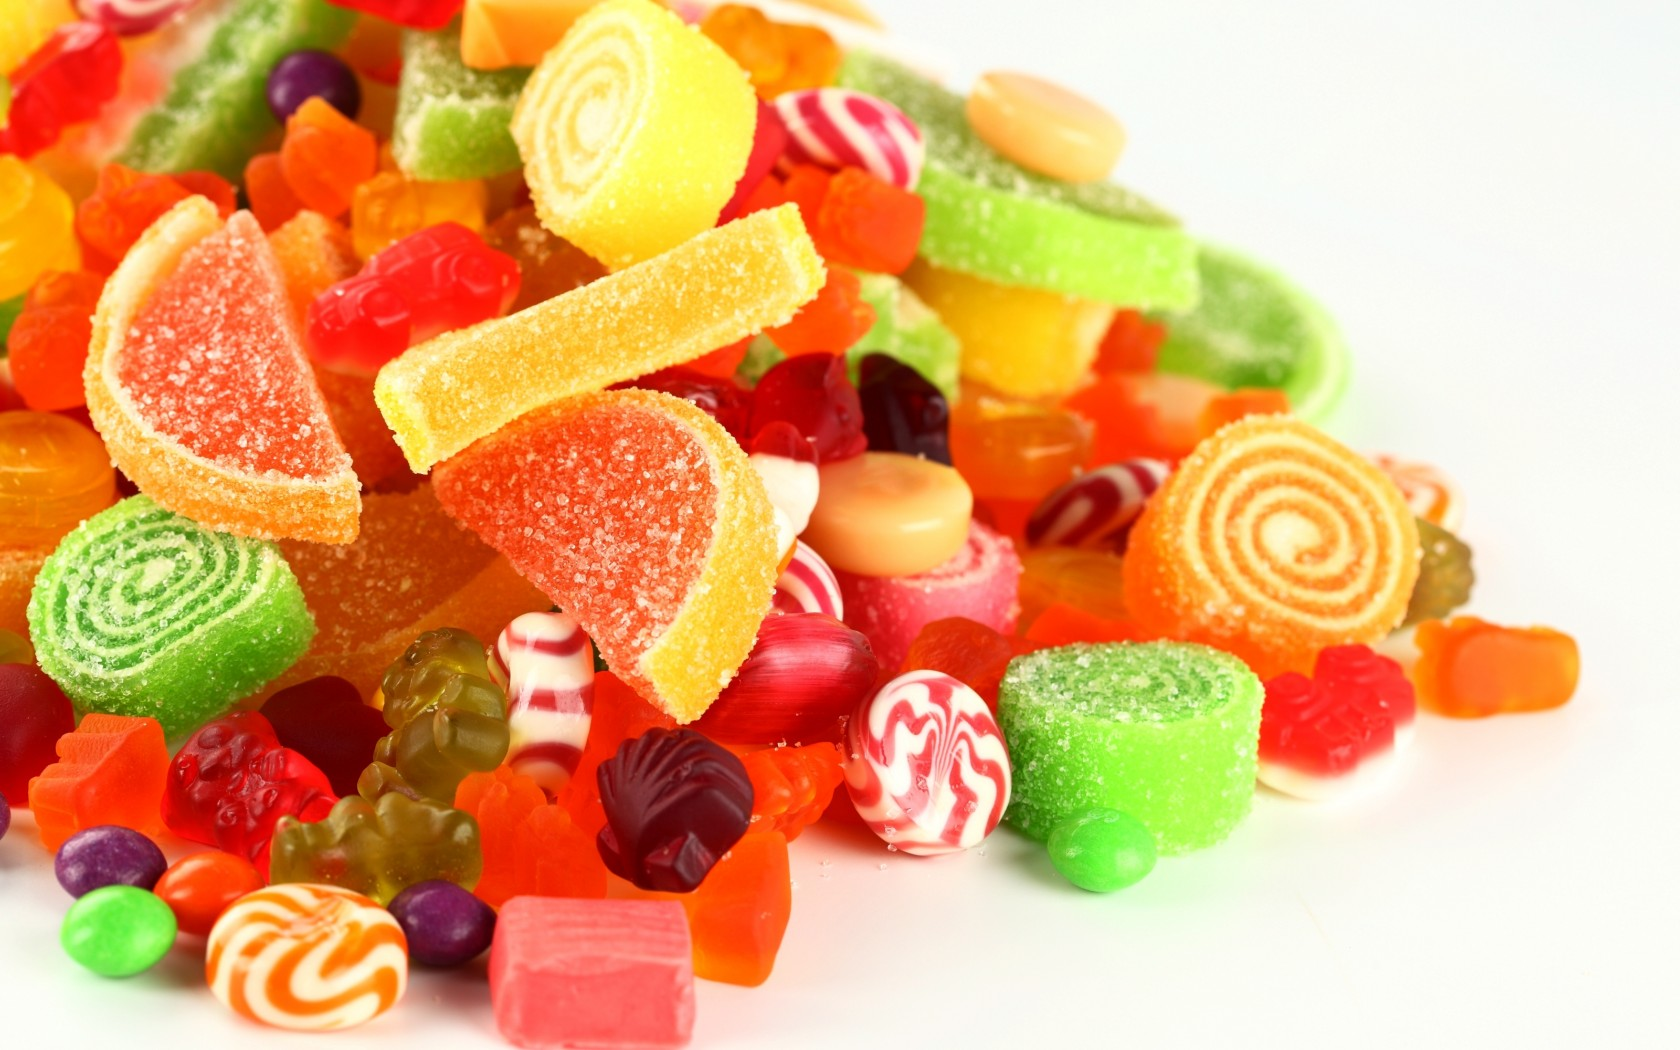 Sweeties Candy 33338276 1680 1050.png - Candy, Transparent background PNG HD thumbnail